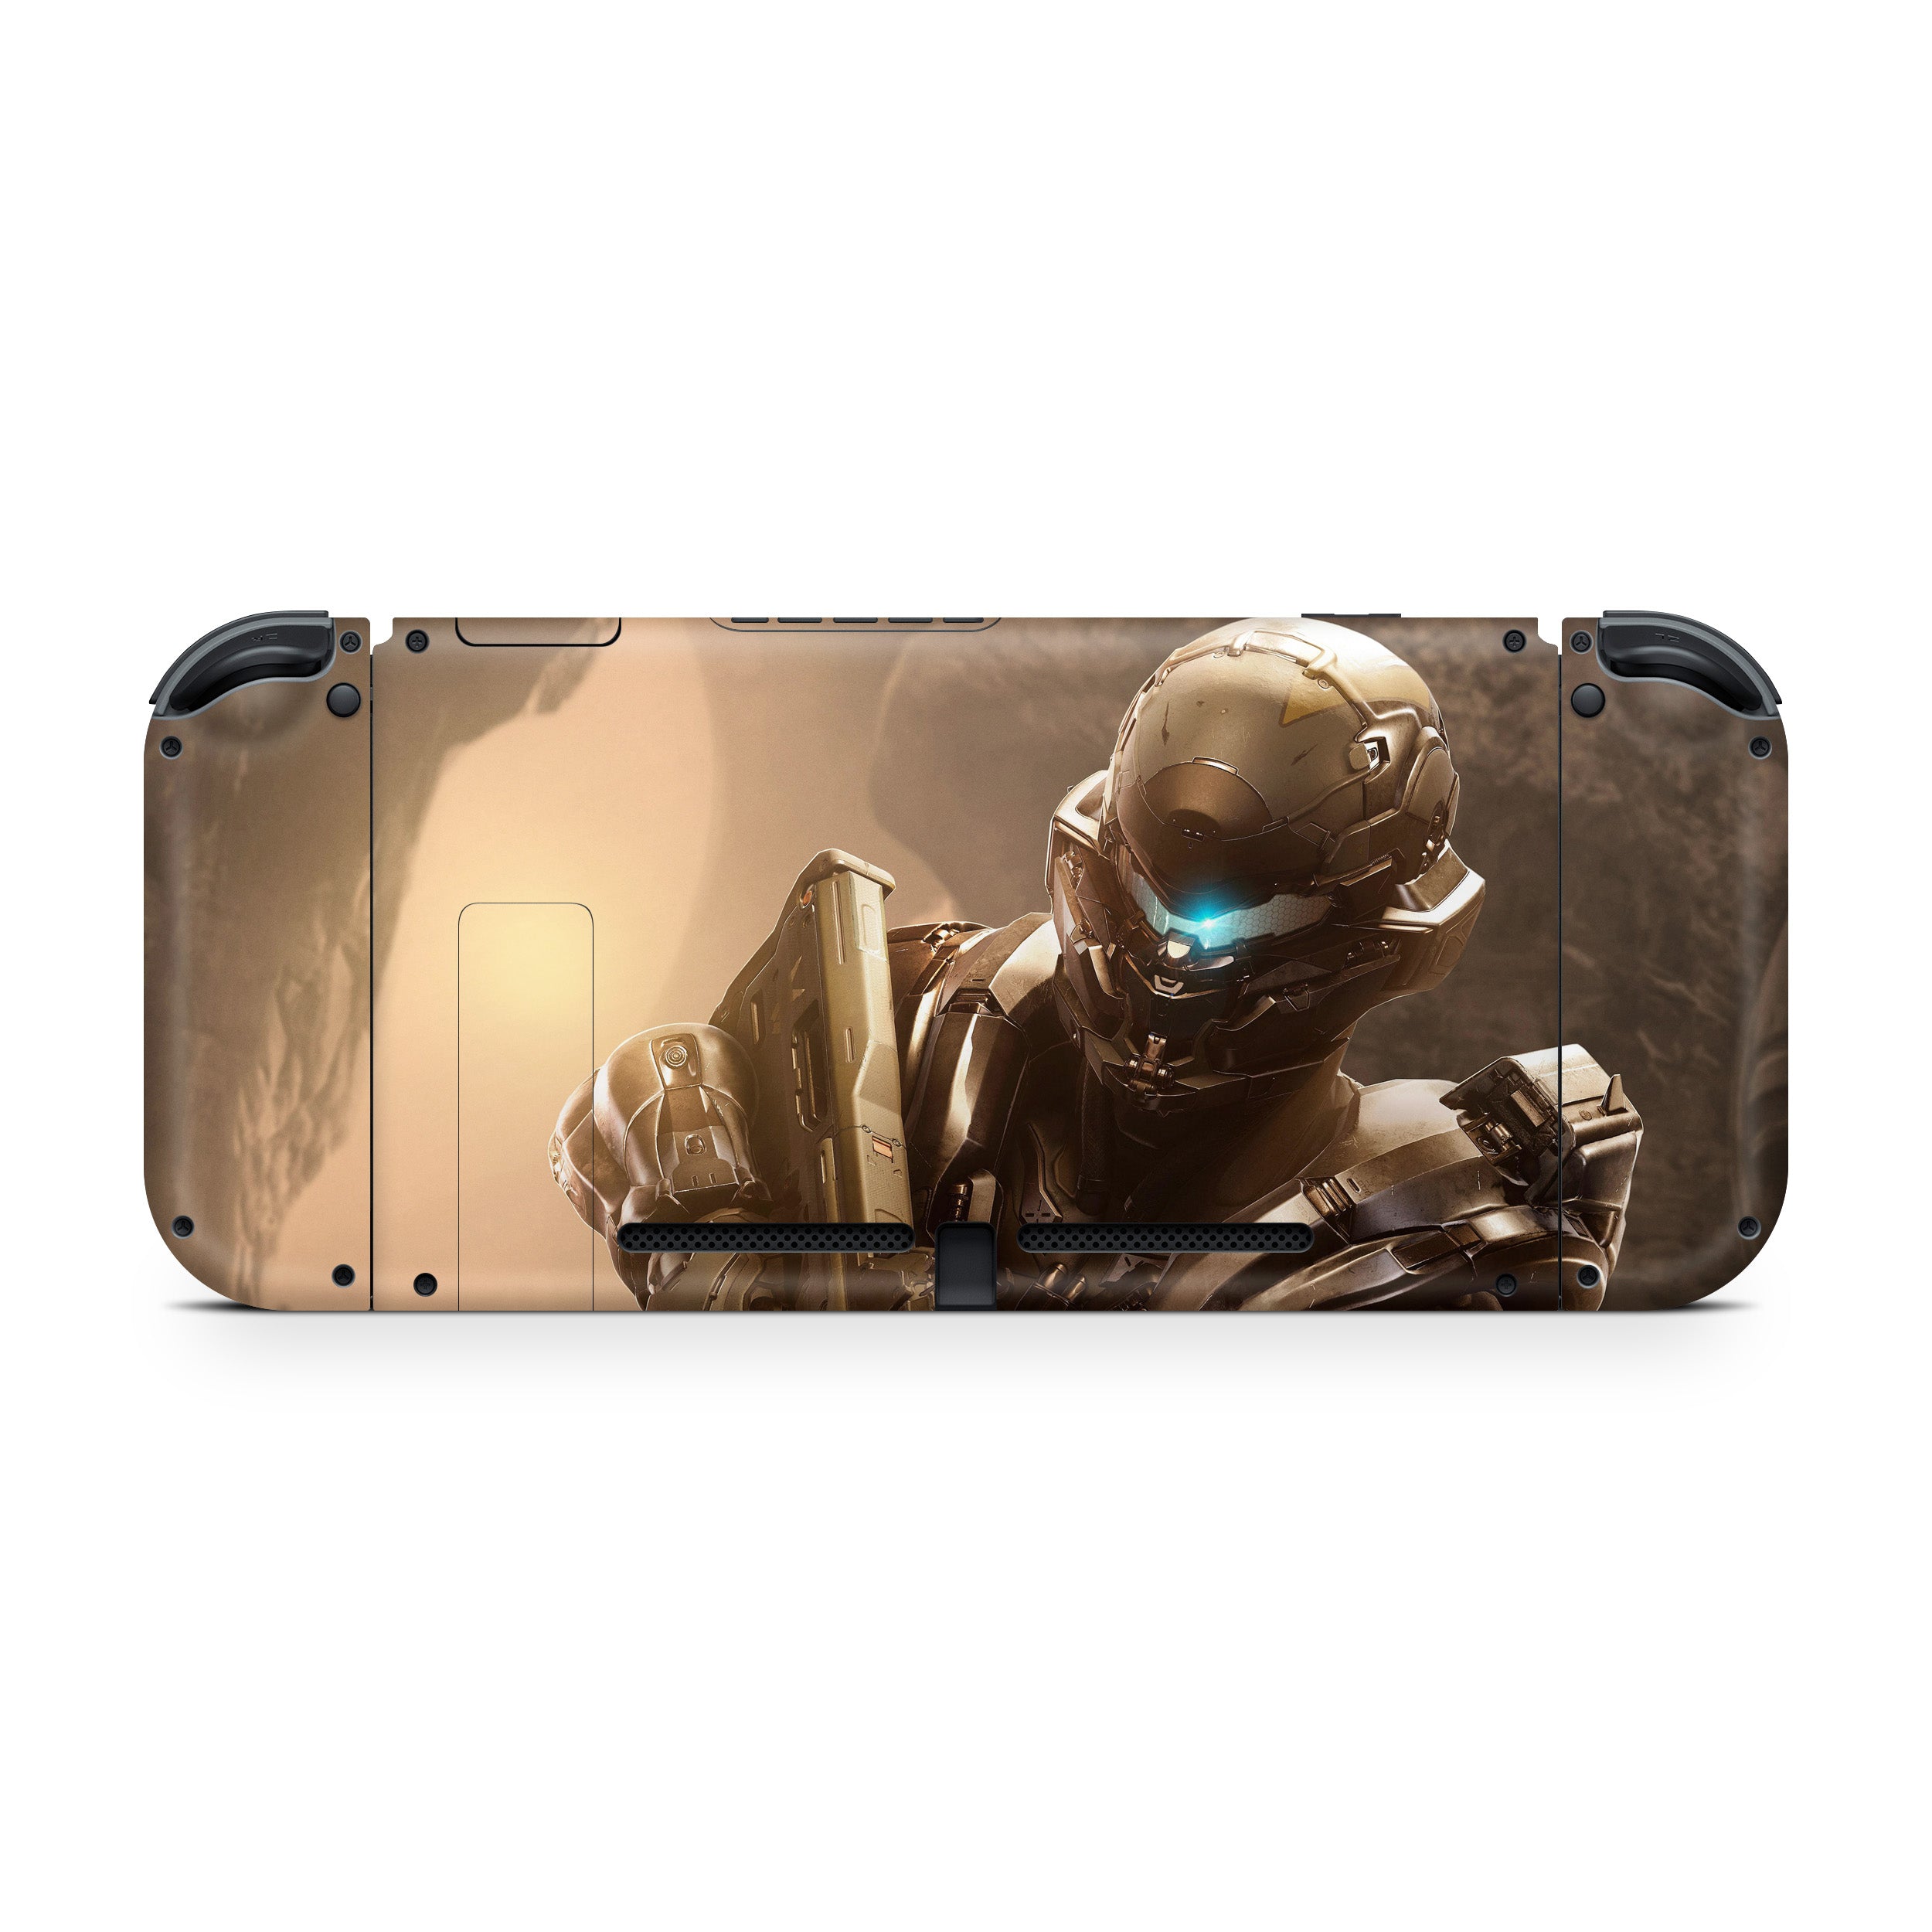 A video game skin featuring a Halo 5 design for the Nintendo Switch.